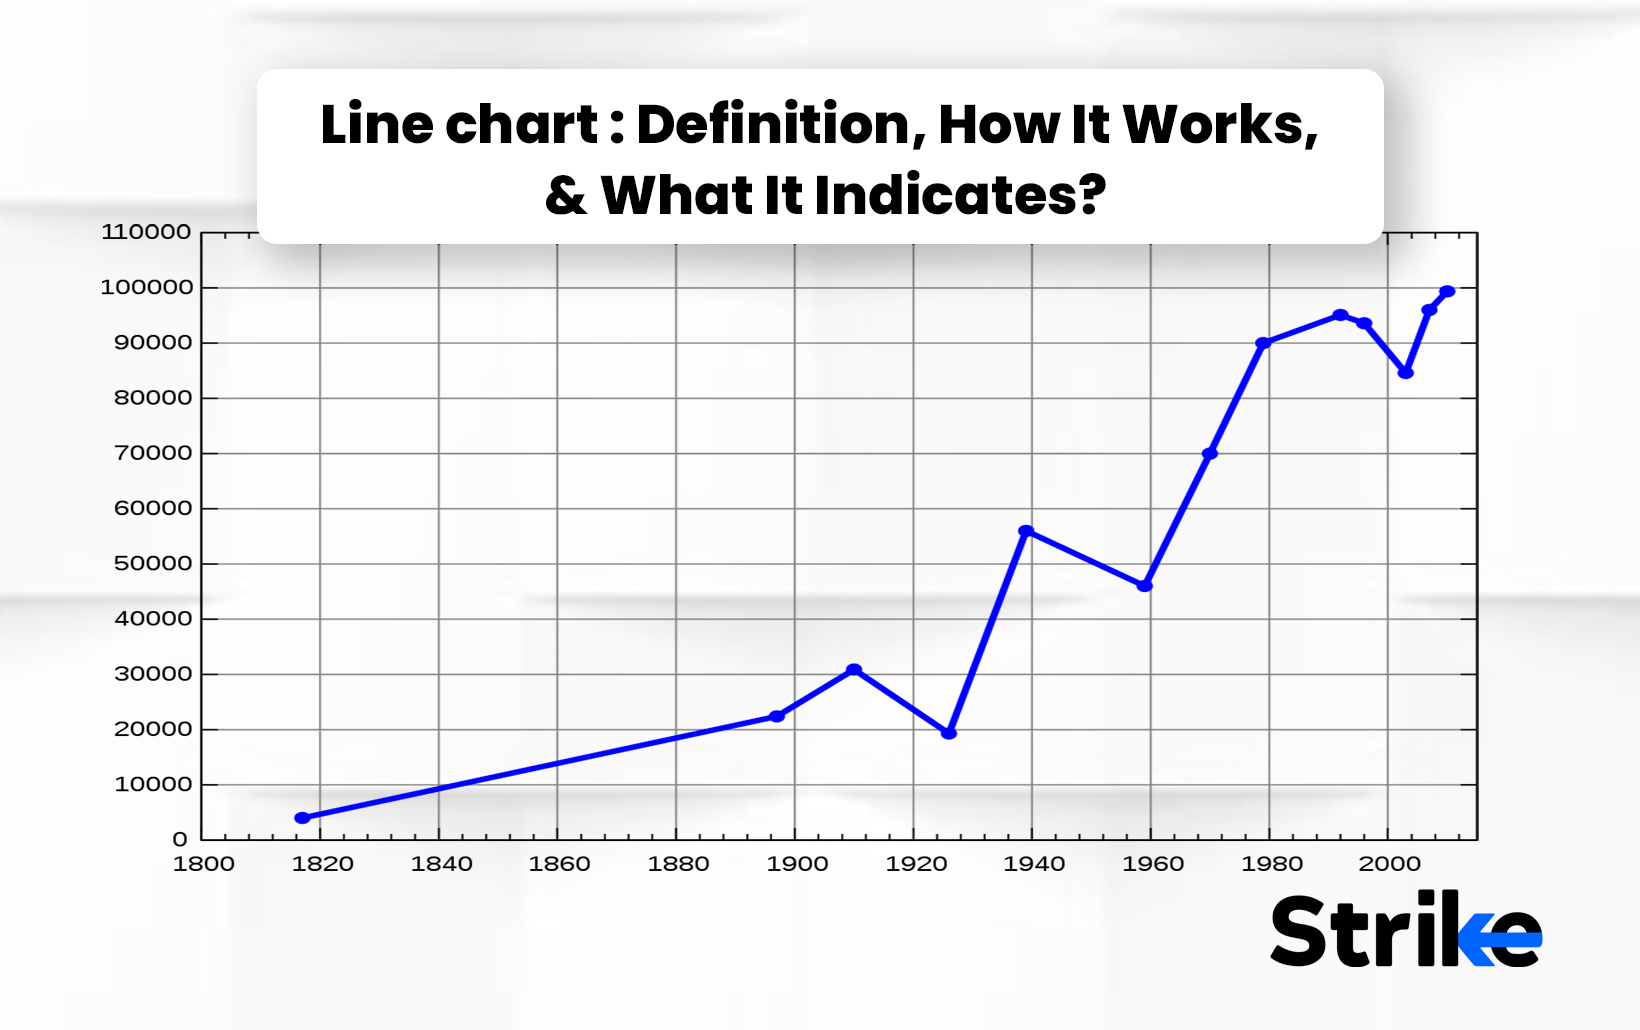 Line chart: Definition, How It Works, and What It Indicates?